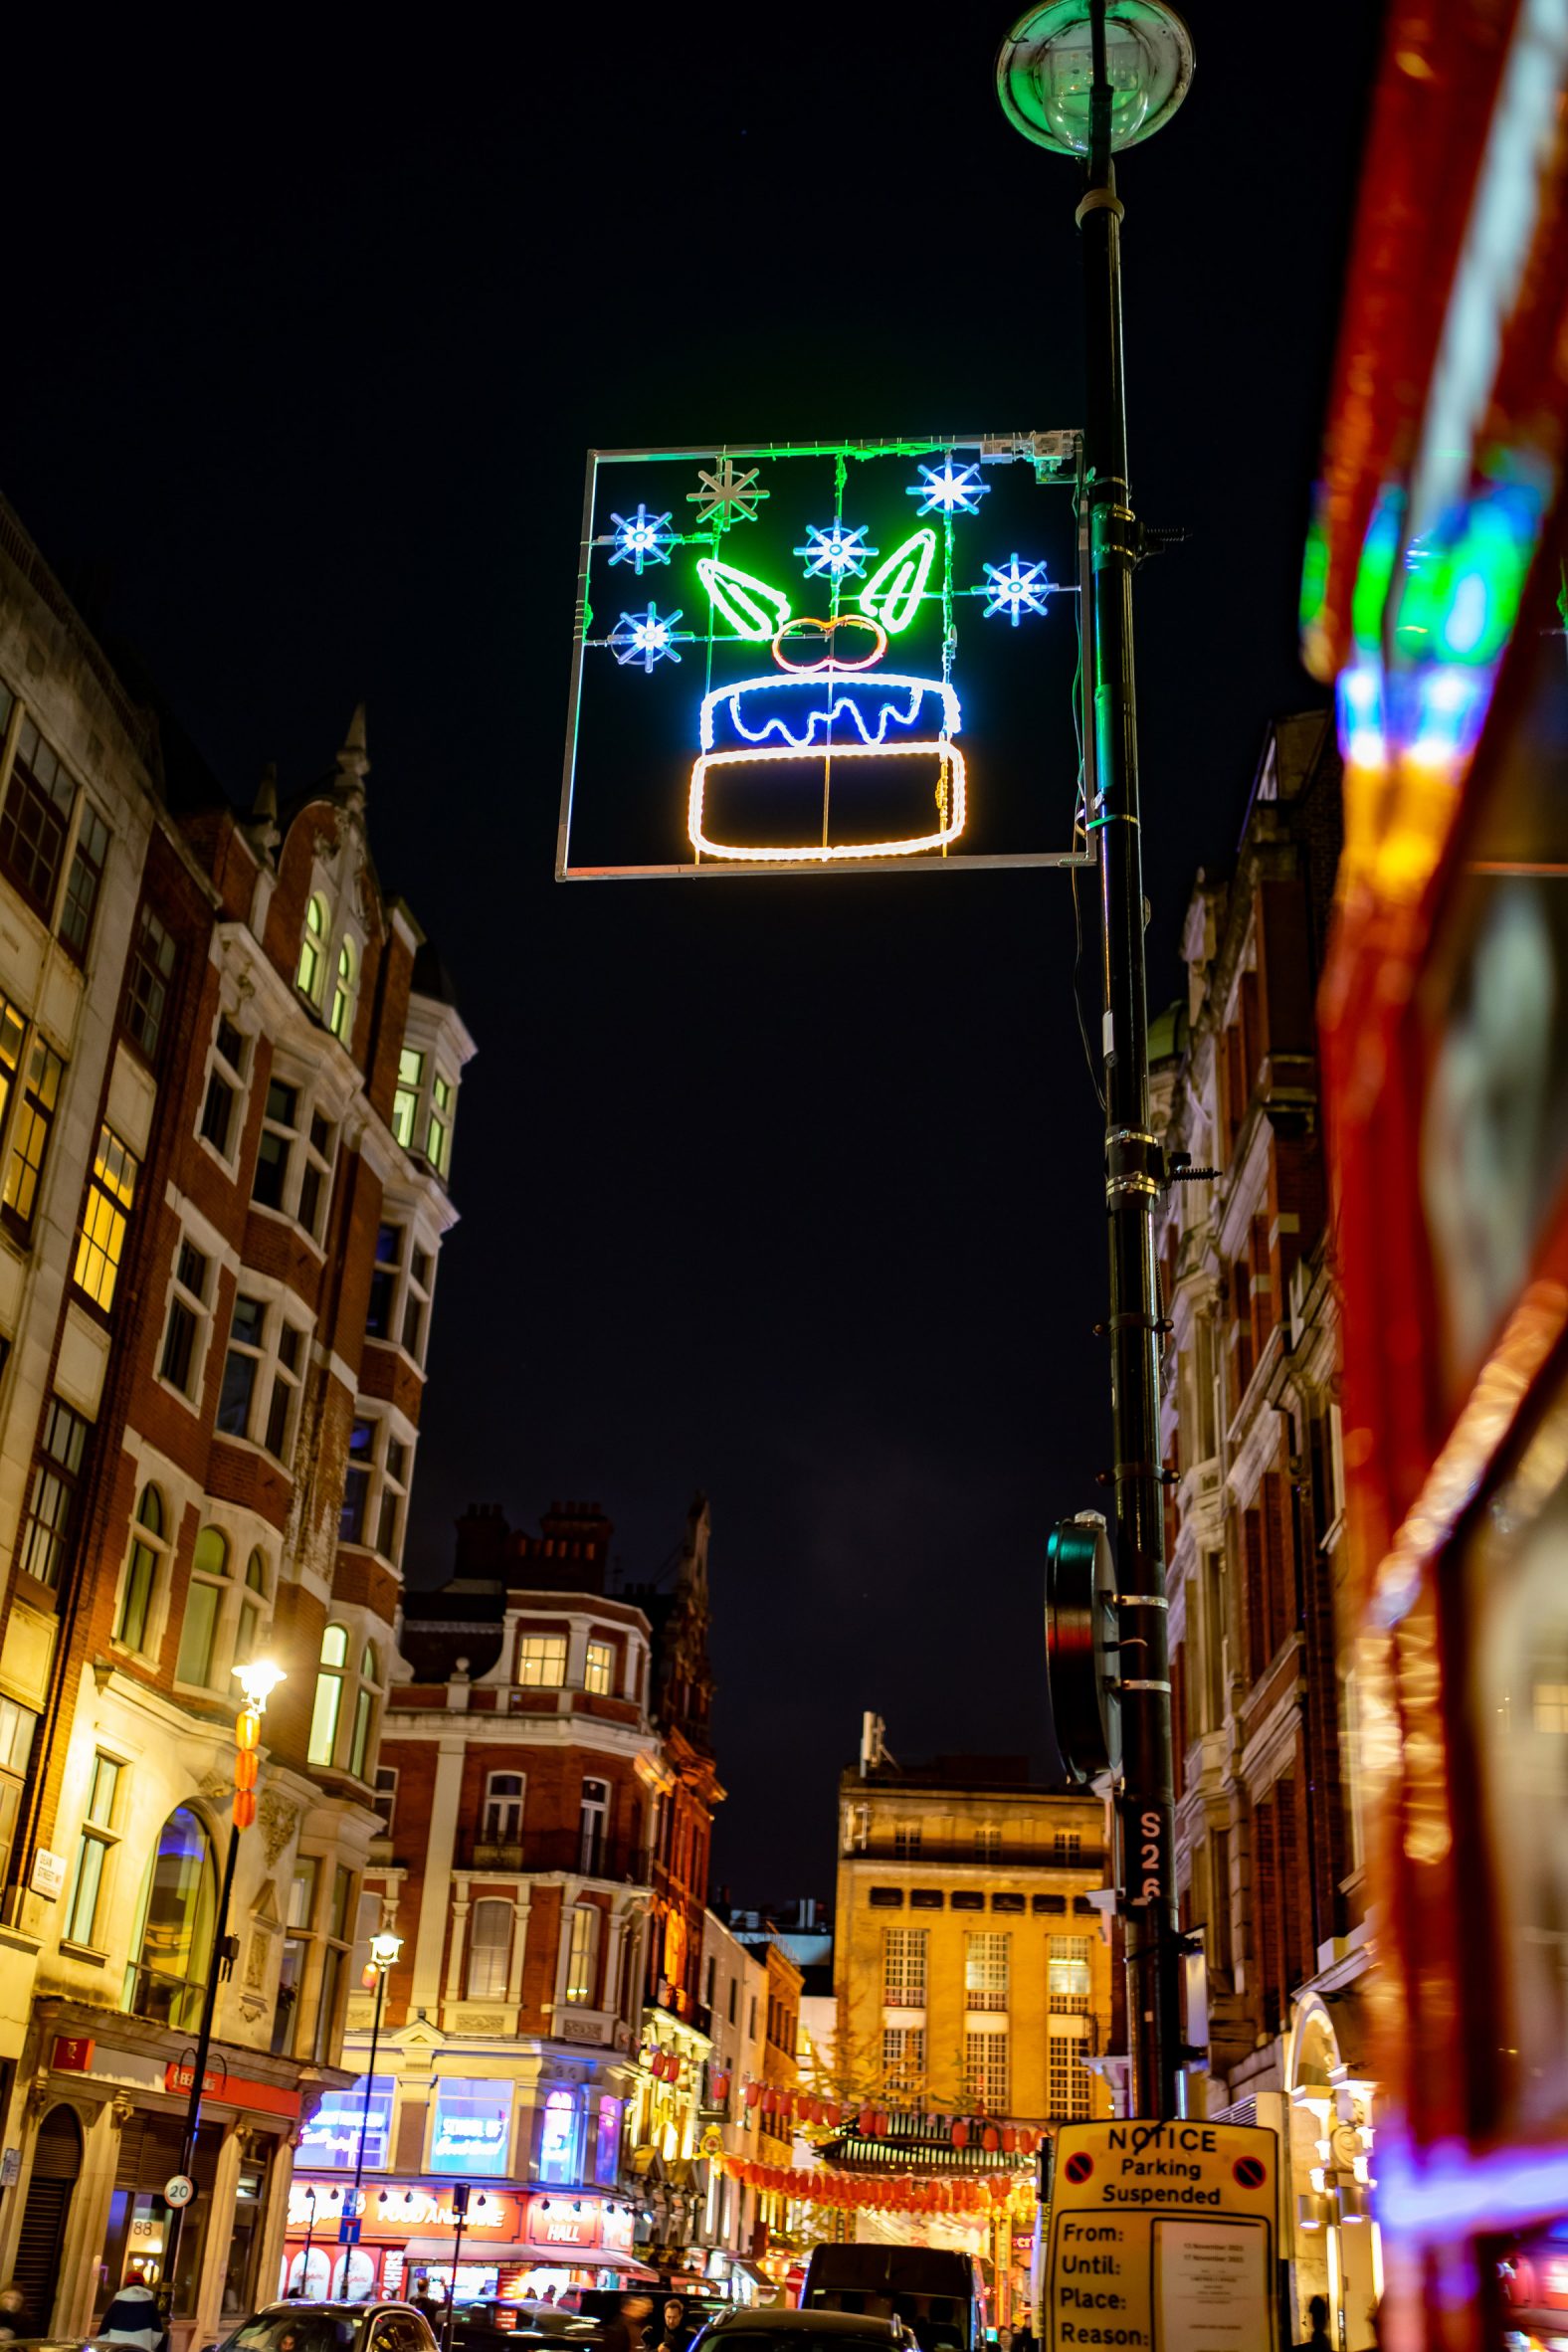 Festive lighting displays designed by students in Soho